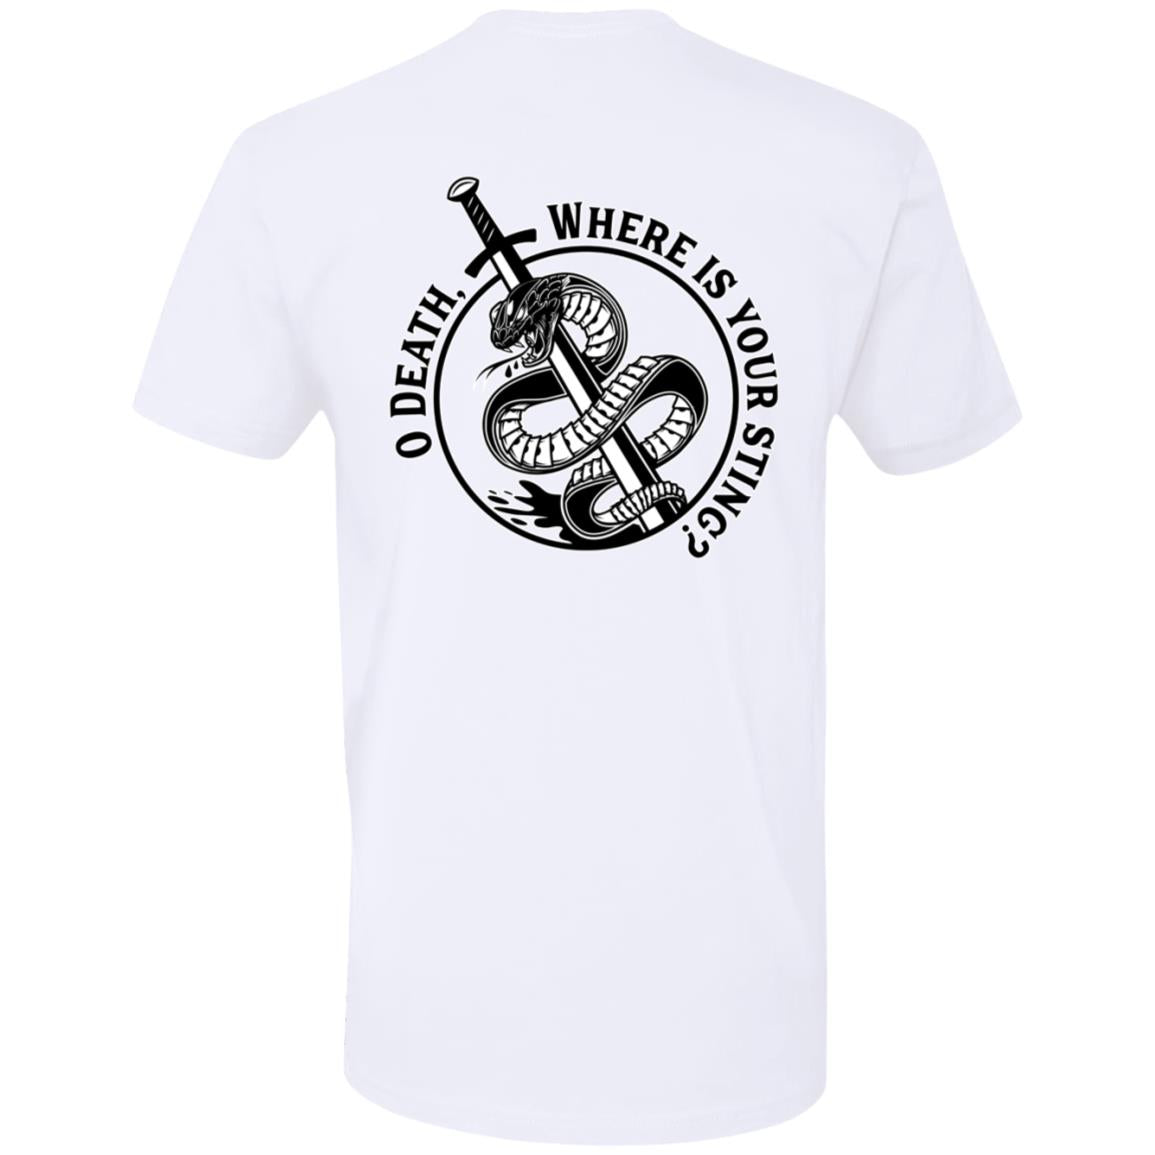 Where is Your Sting? (Unisex Tee)